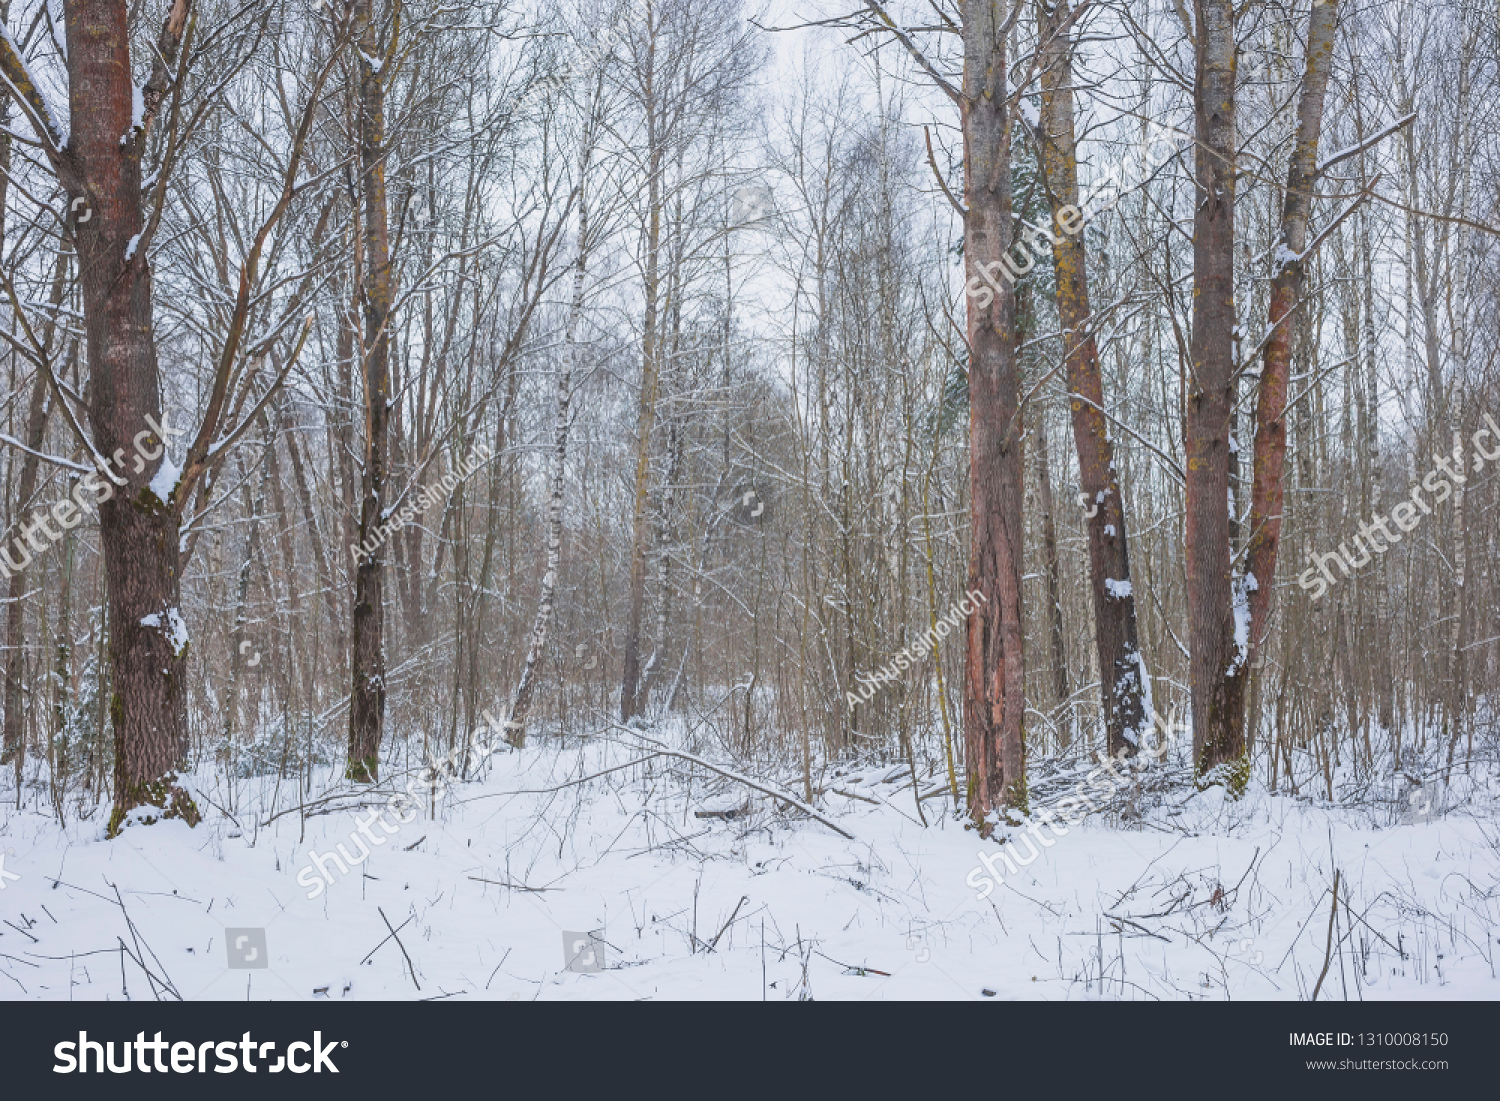 Winter day in the forest. Nature in the vicinity of Pruzhany, Brest region, Belarus. #1310008150